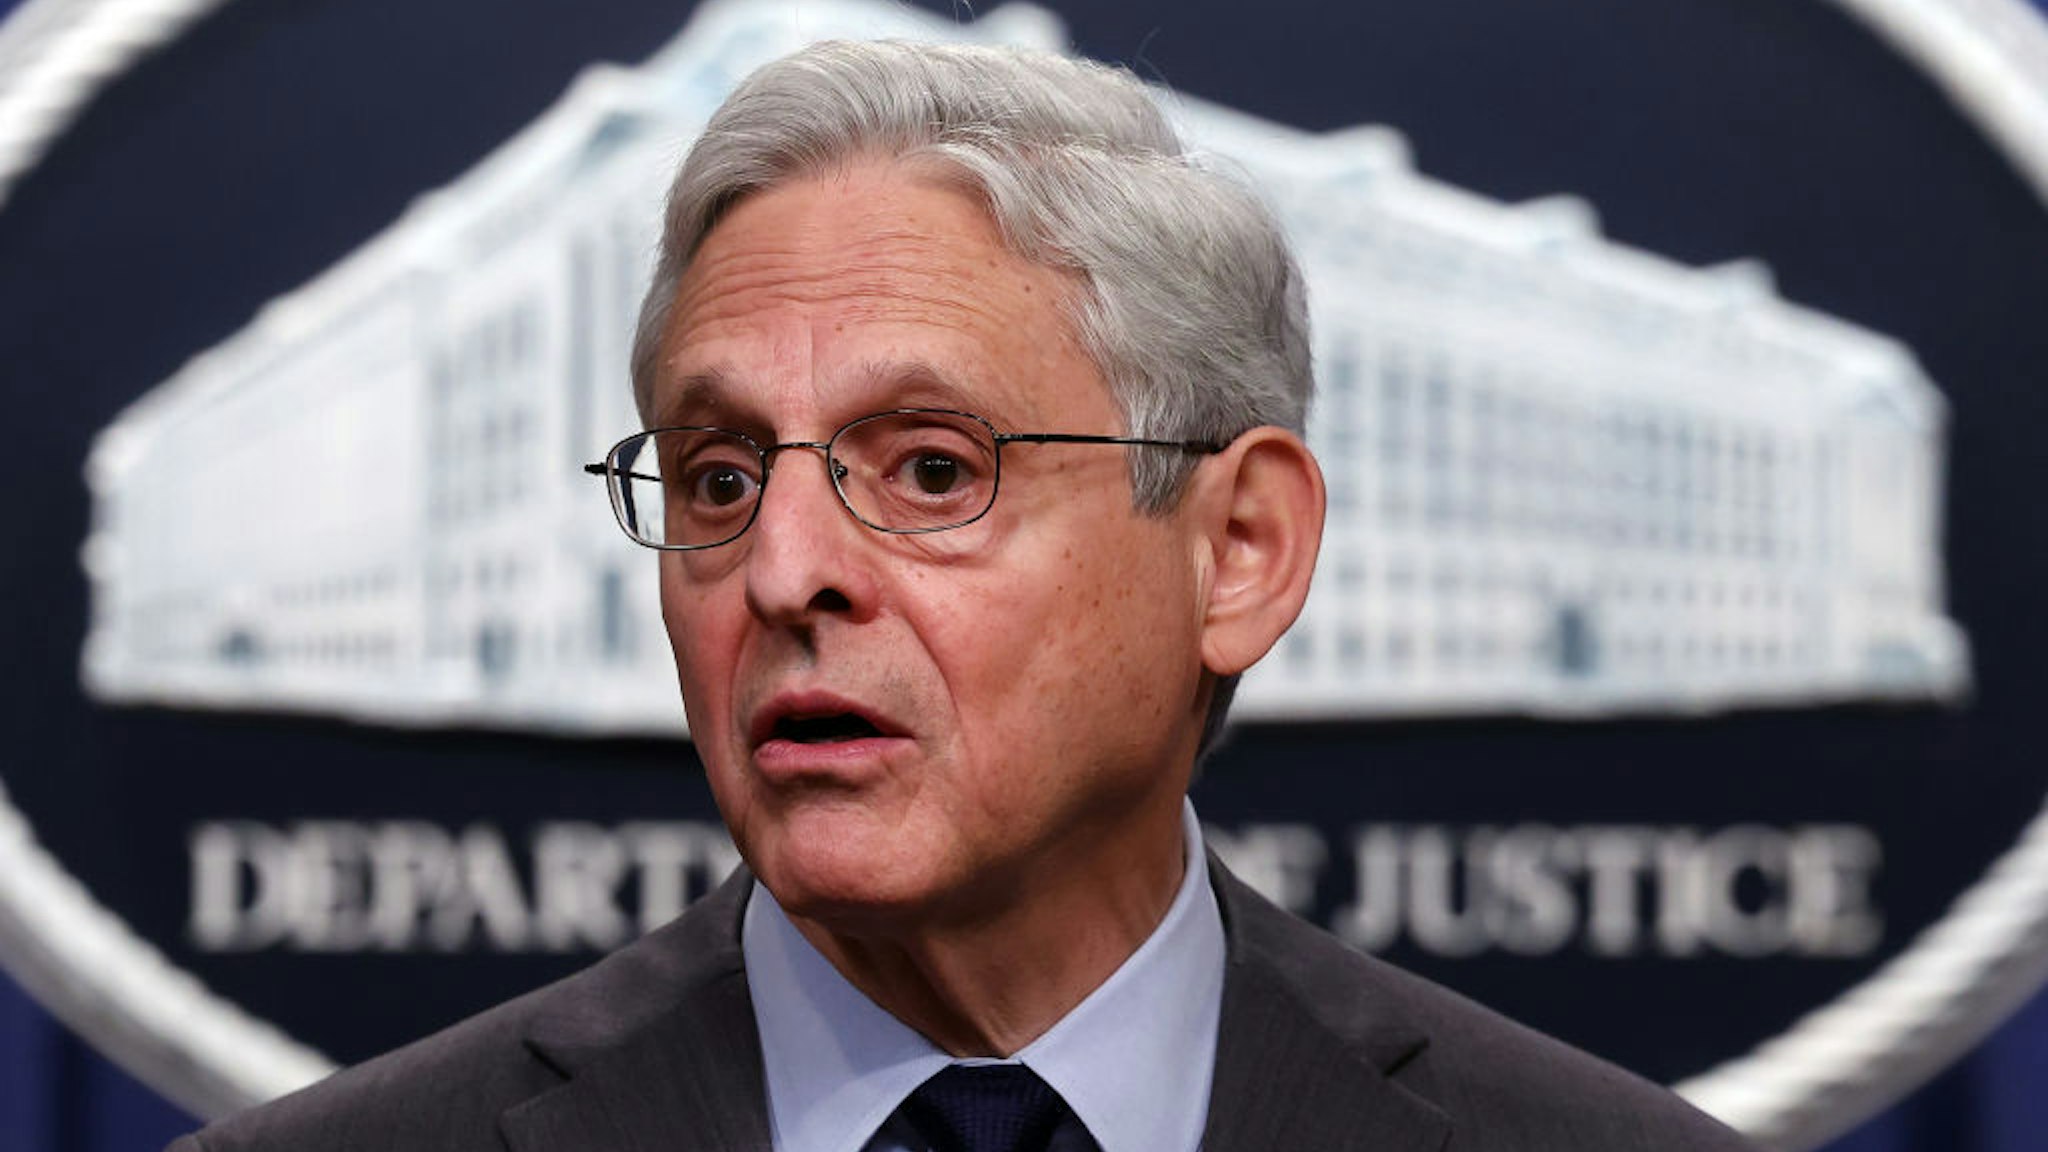 WASHINGTON, DC - OCTOBER 24: U.S. Attorney General Merrick Garland speaks at a press conference at the U.S. Department of Justice on on October 24, 2022 in Washington, DC. The Justice Department announced it has charged 13 individuals, including members of the Chinese intelligence and their agents, for alleged efforts to unlawfully exert influence in the United States for the benefit of the government of China. (Photo by Kevin Dietsch/Getty Images)